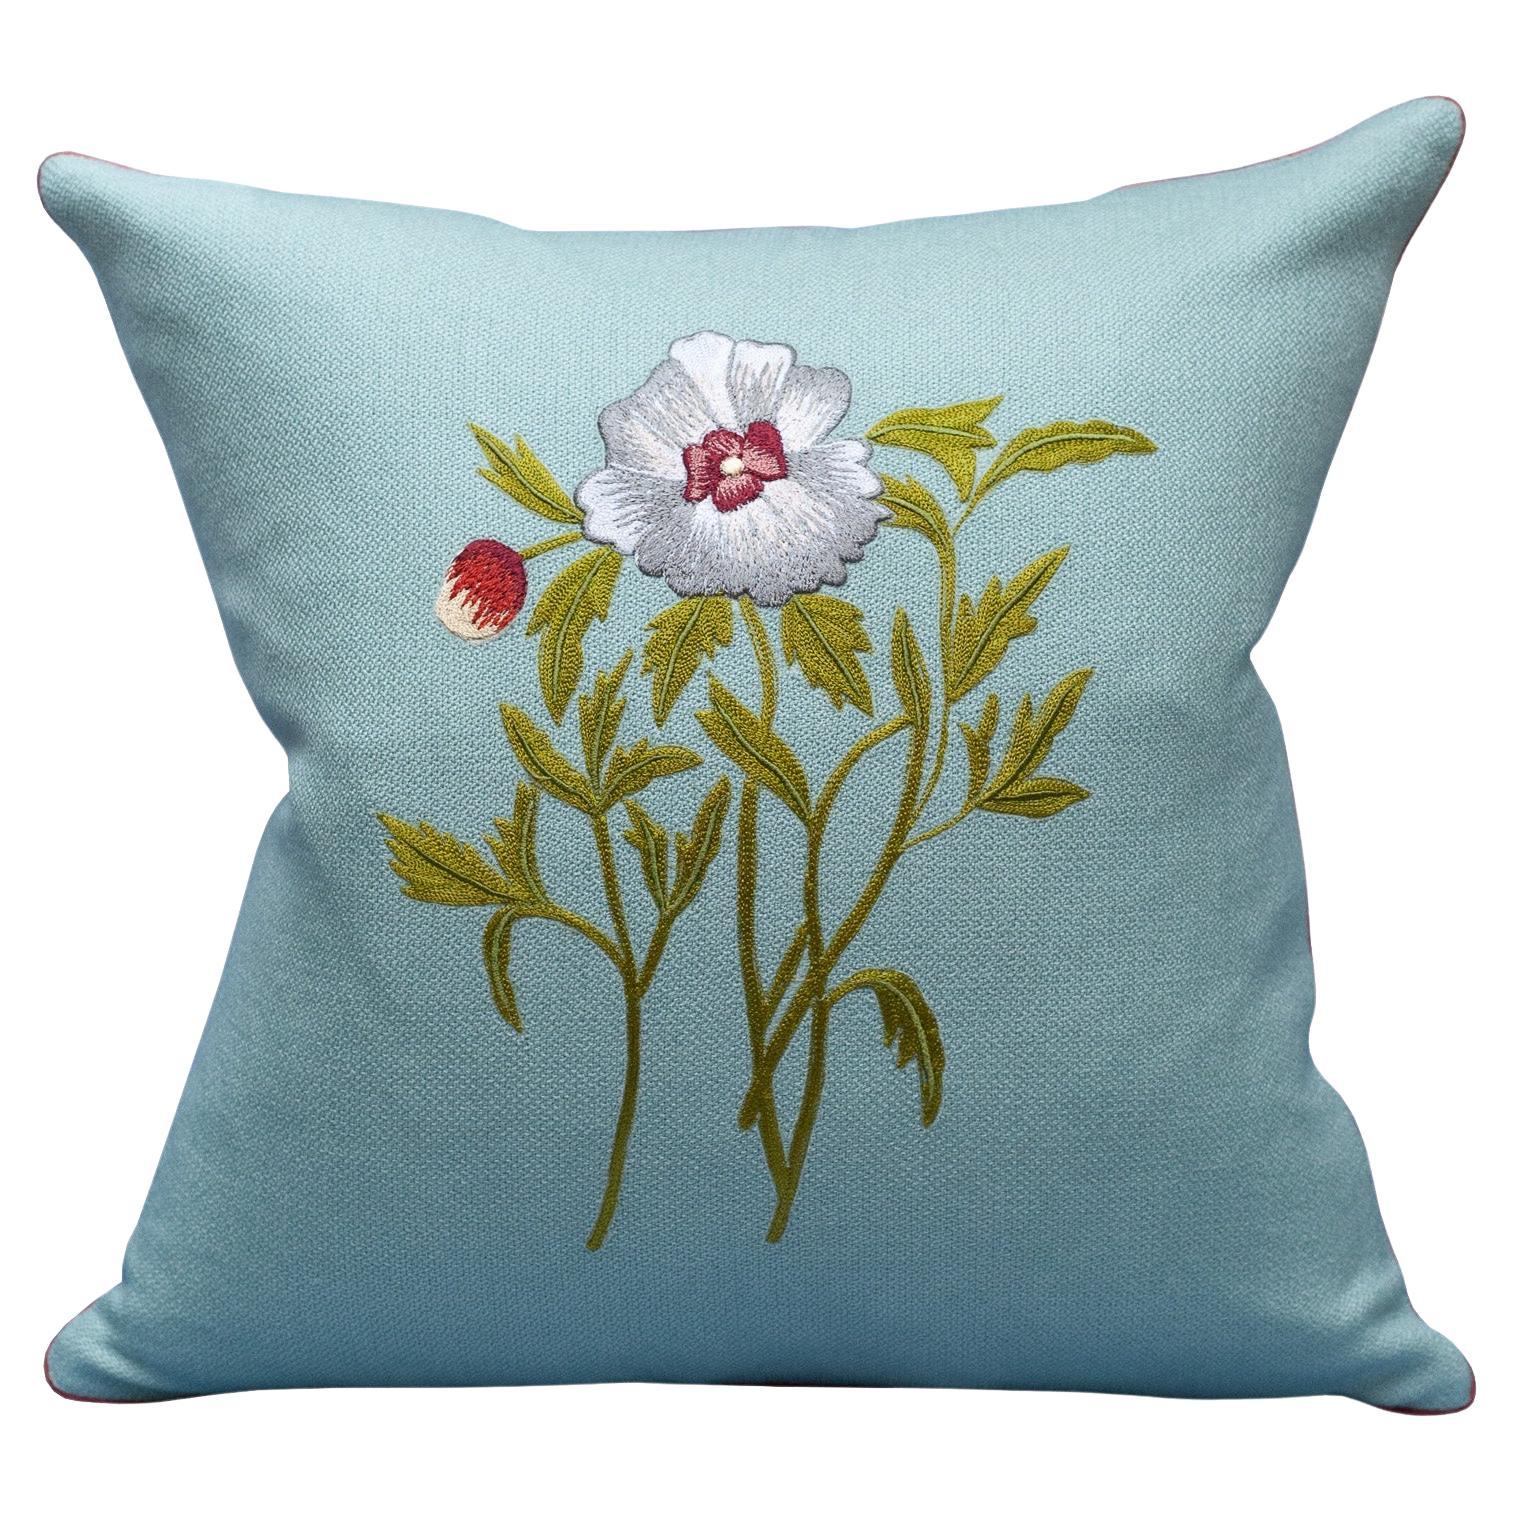 Contemporary Soft Blue Merino Wool and Linen Pillow with Embroidered Flower For Sale